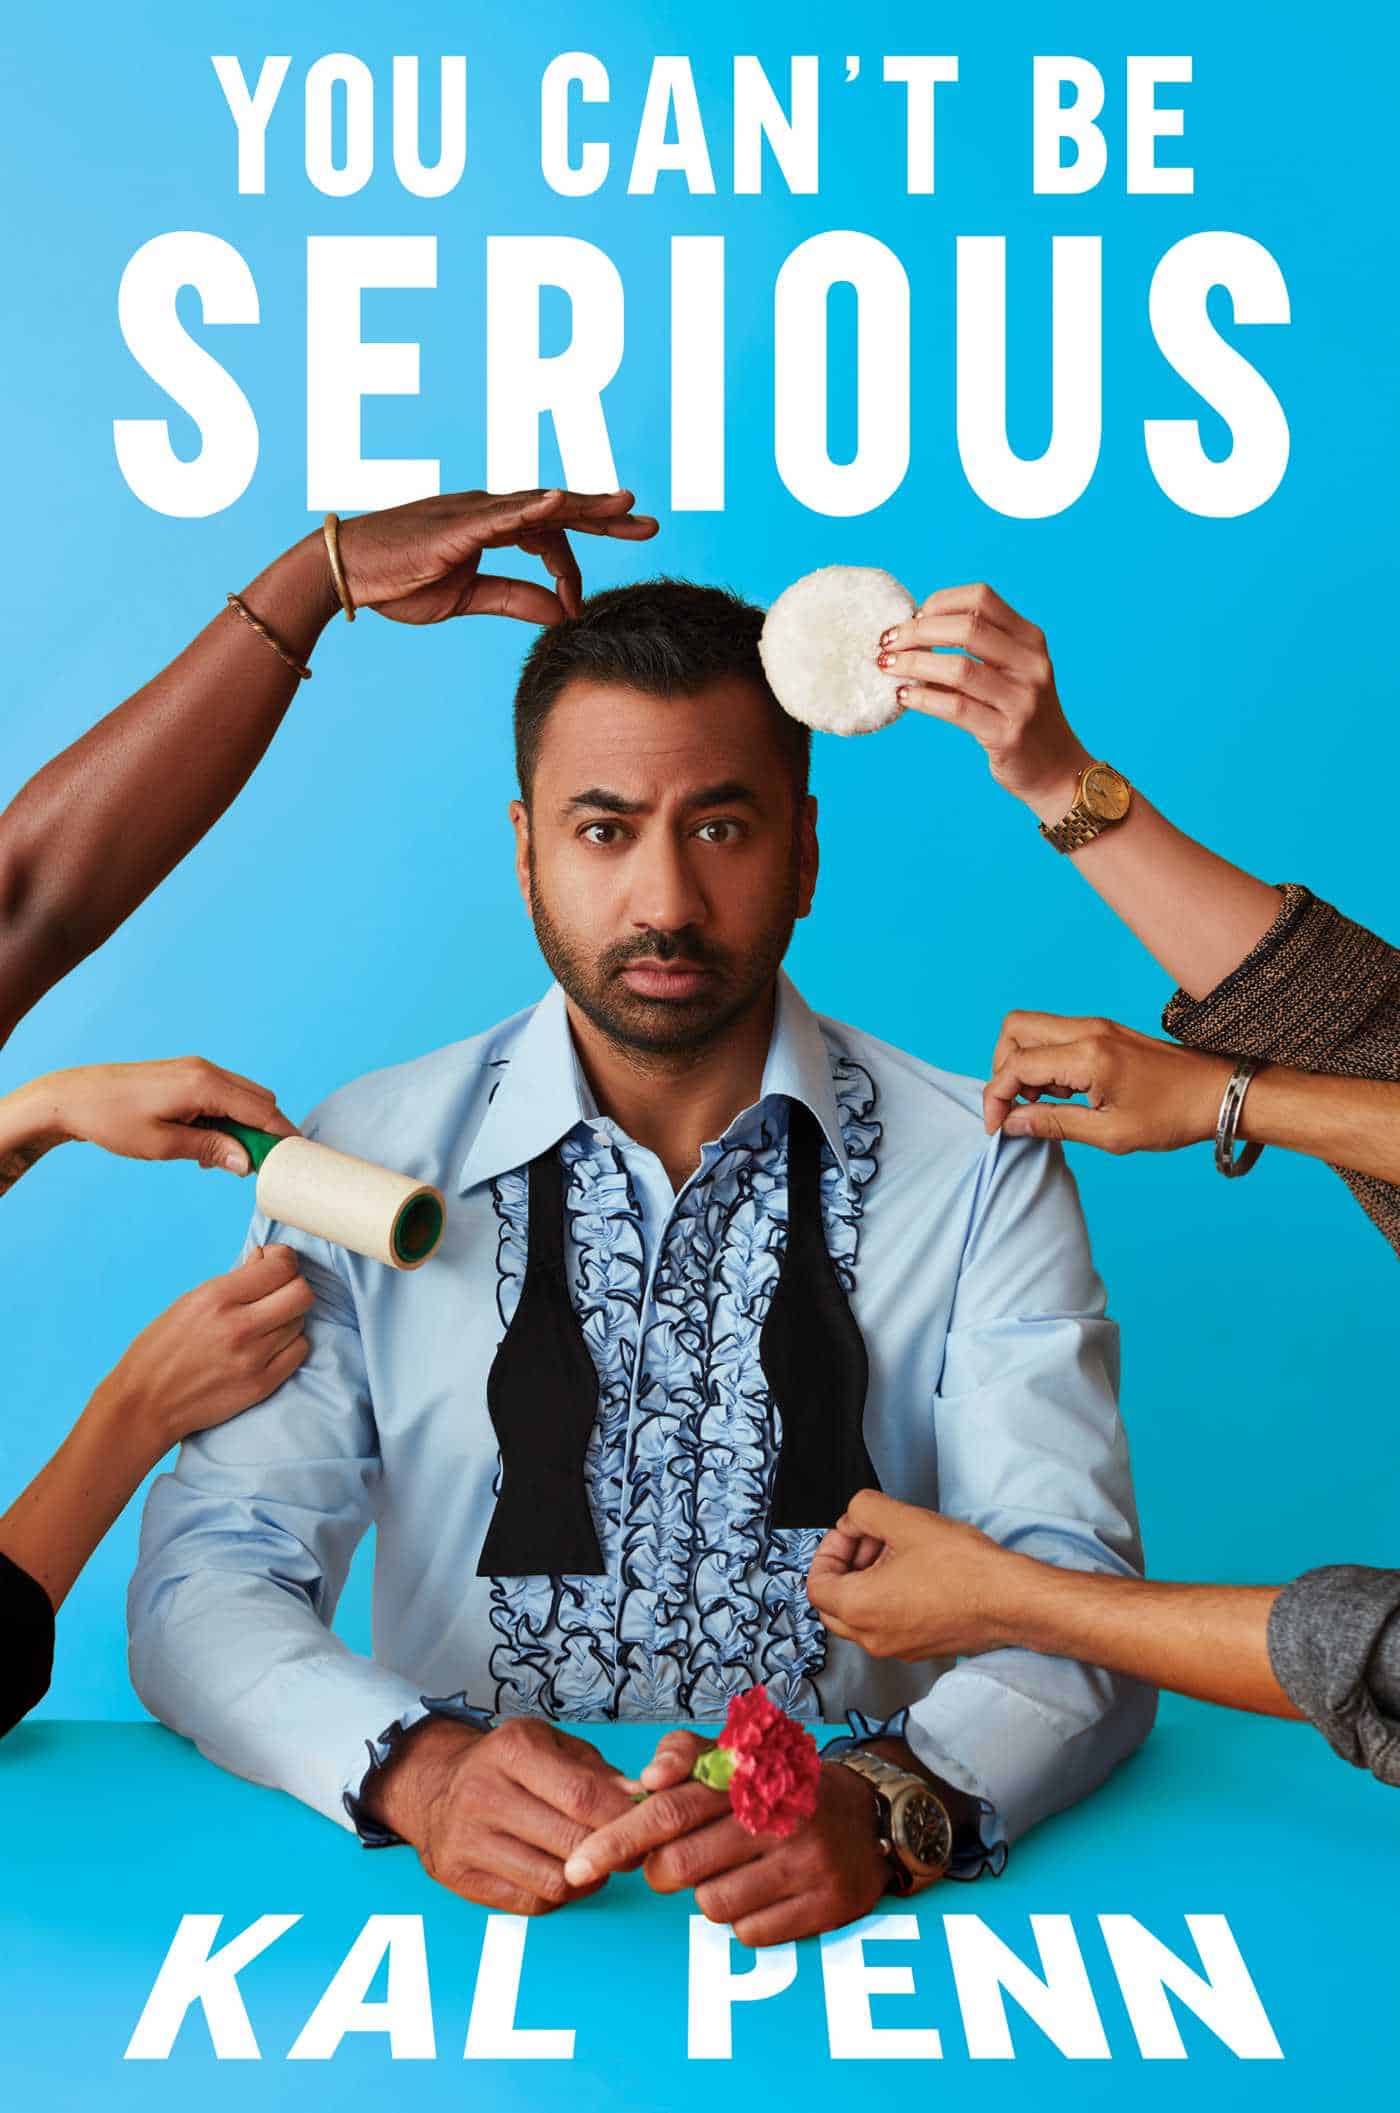 Cover - You Can't Be Serious_Kal Penn (1)